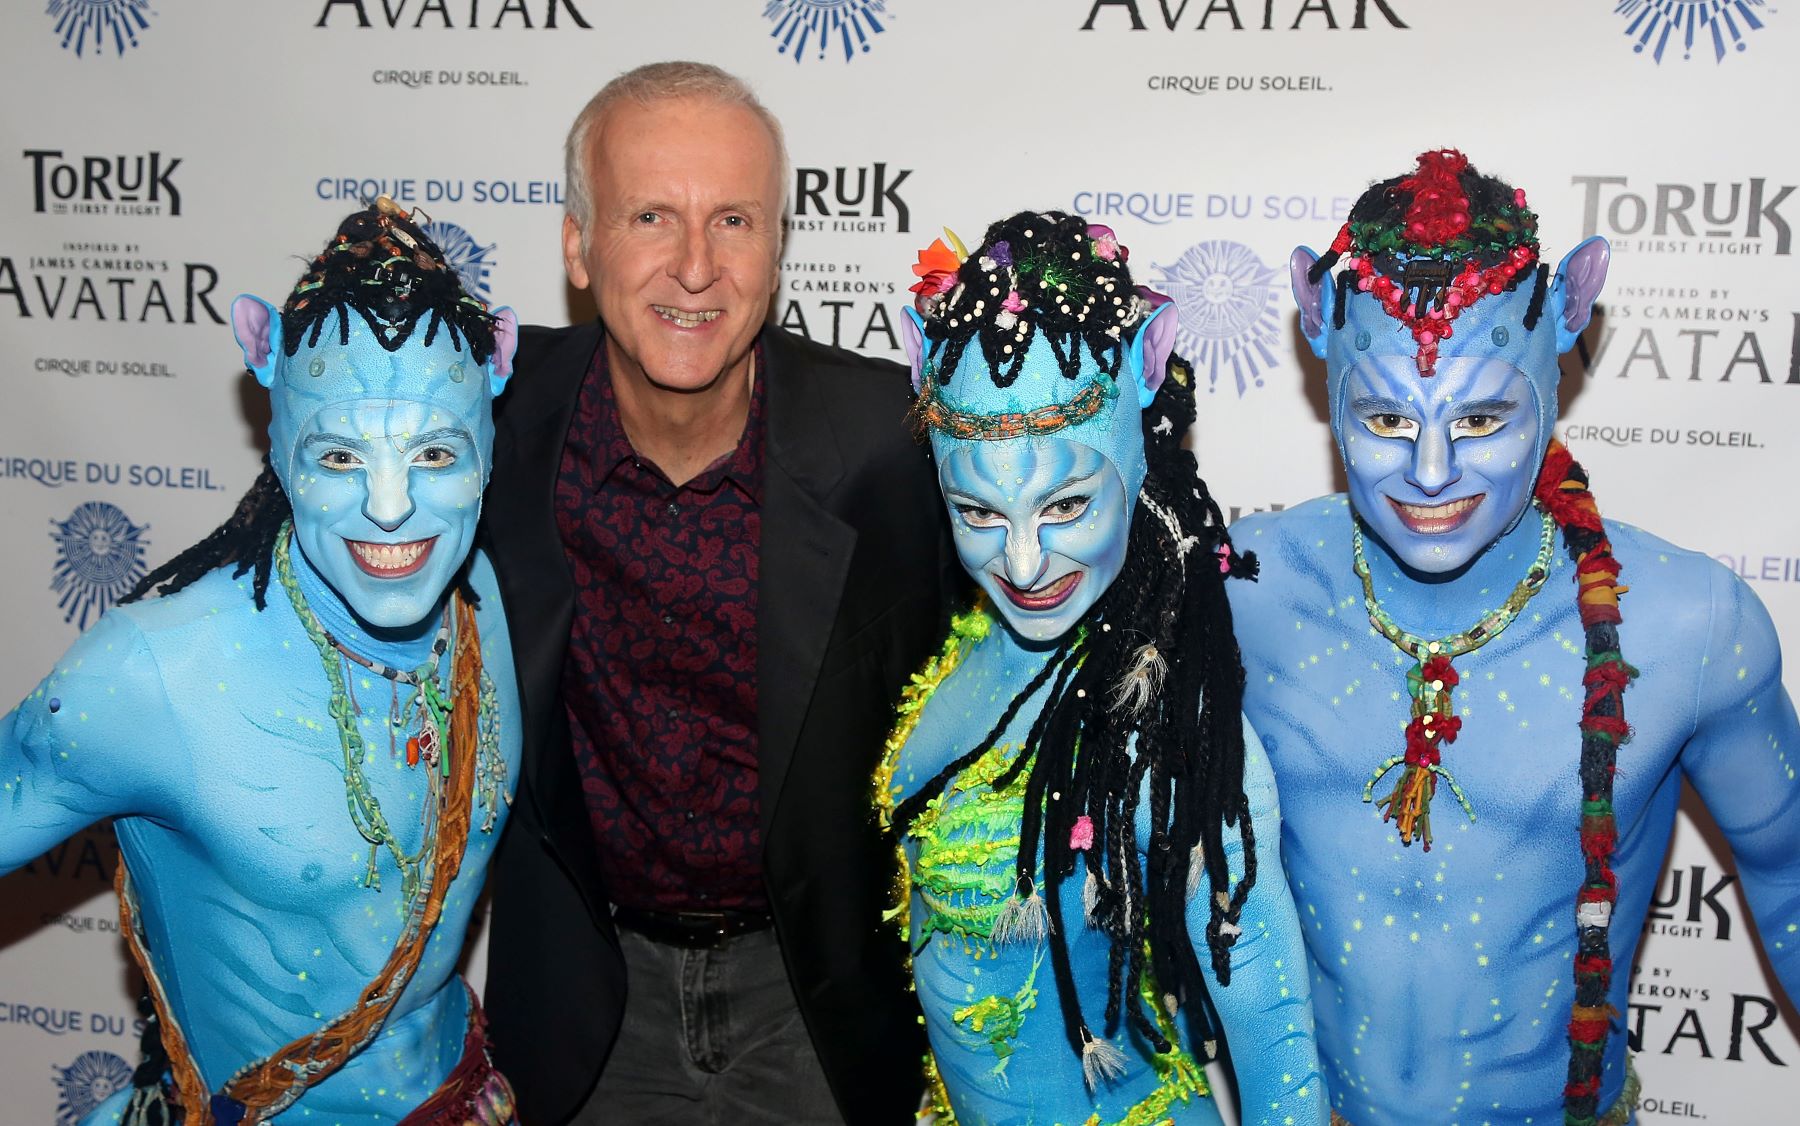 James Cameron with Cirque Du Soleil's 'Toruk' performers dressed like Na'vi from 'Avatar' at Barclays Center